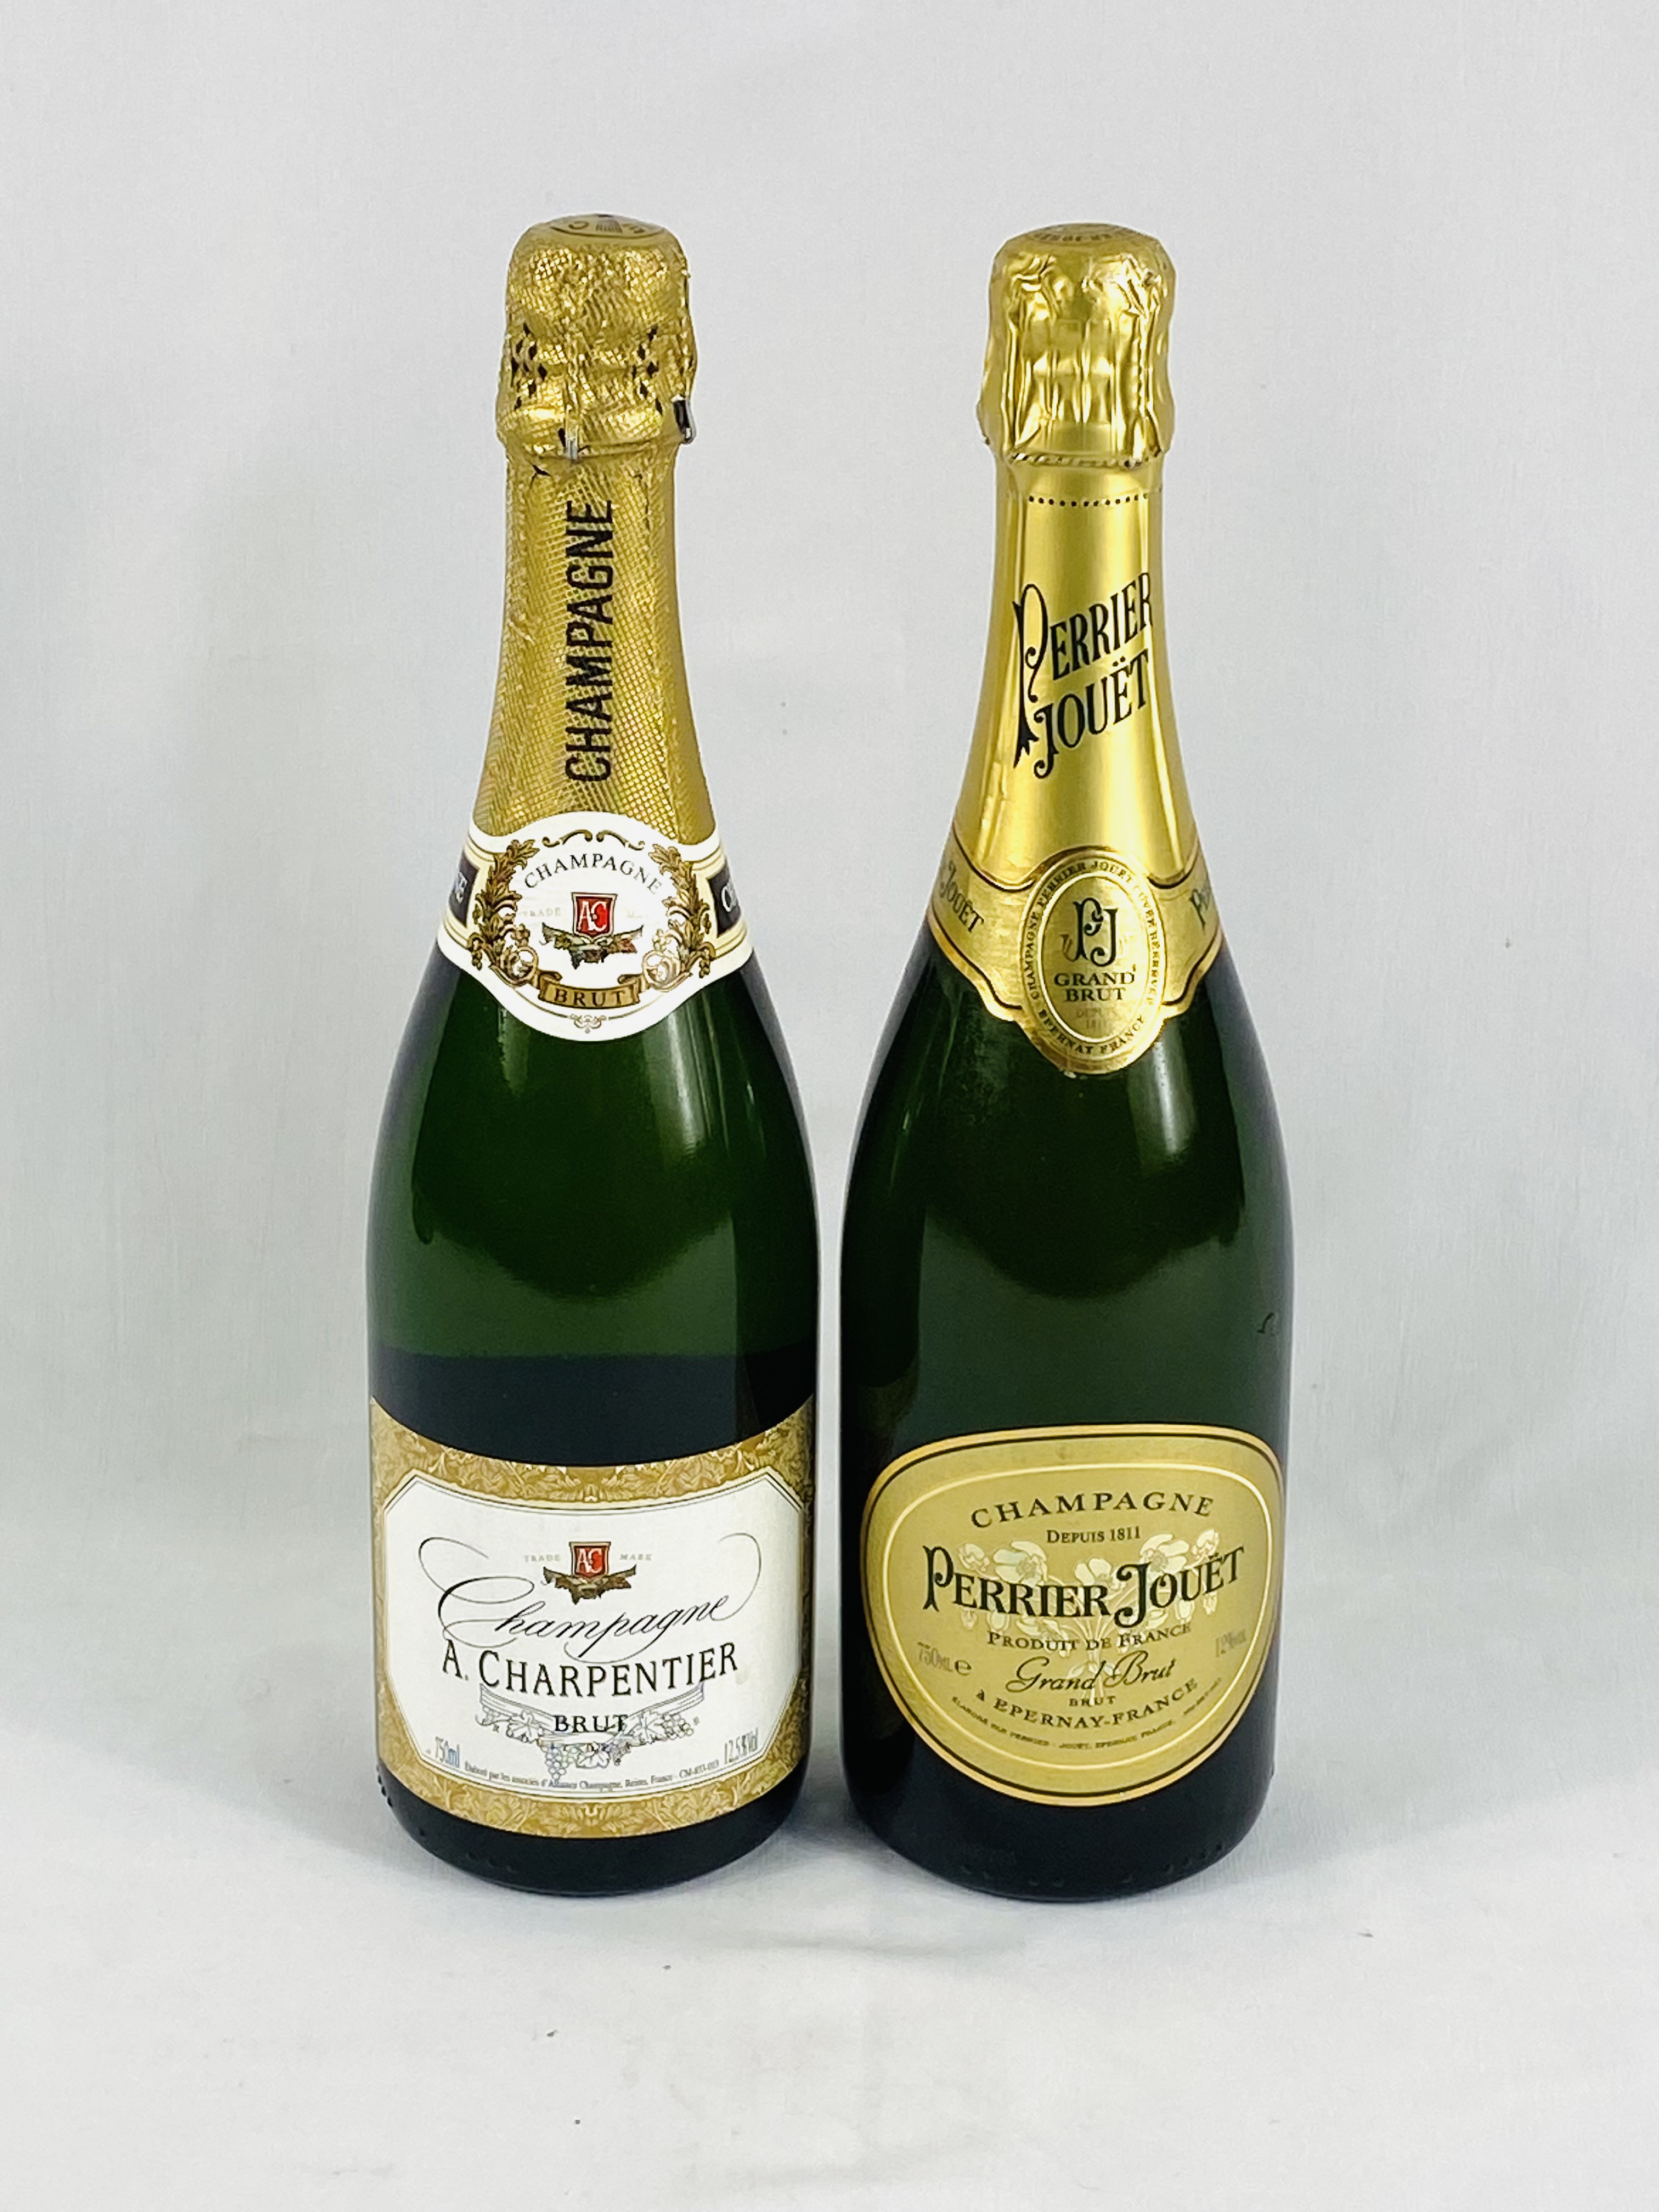 Bottle of Perrier Jouet Champagne; together with a bottle of Charpentier Tradition Brut.